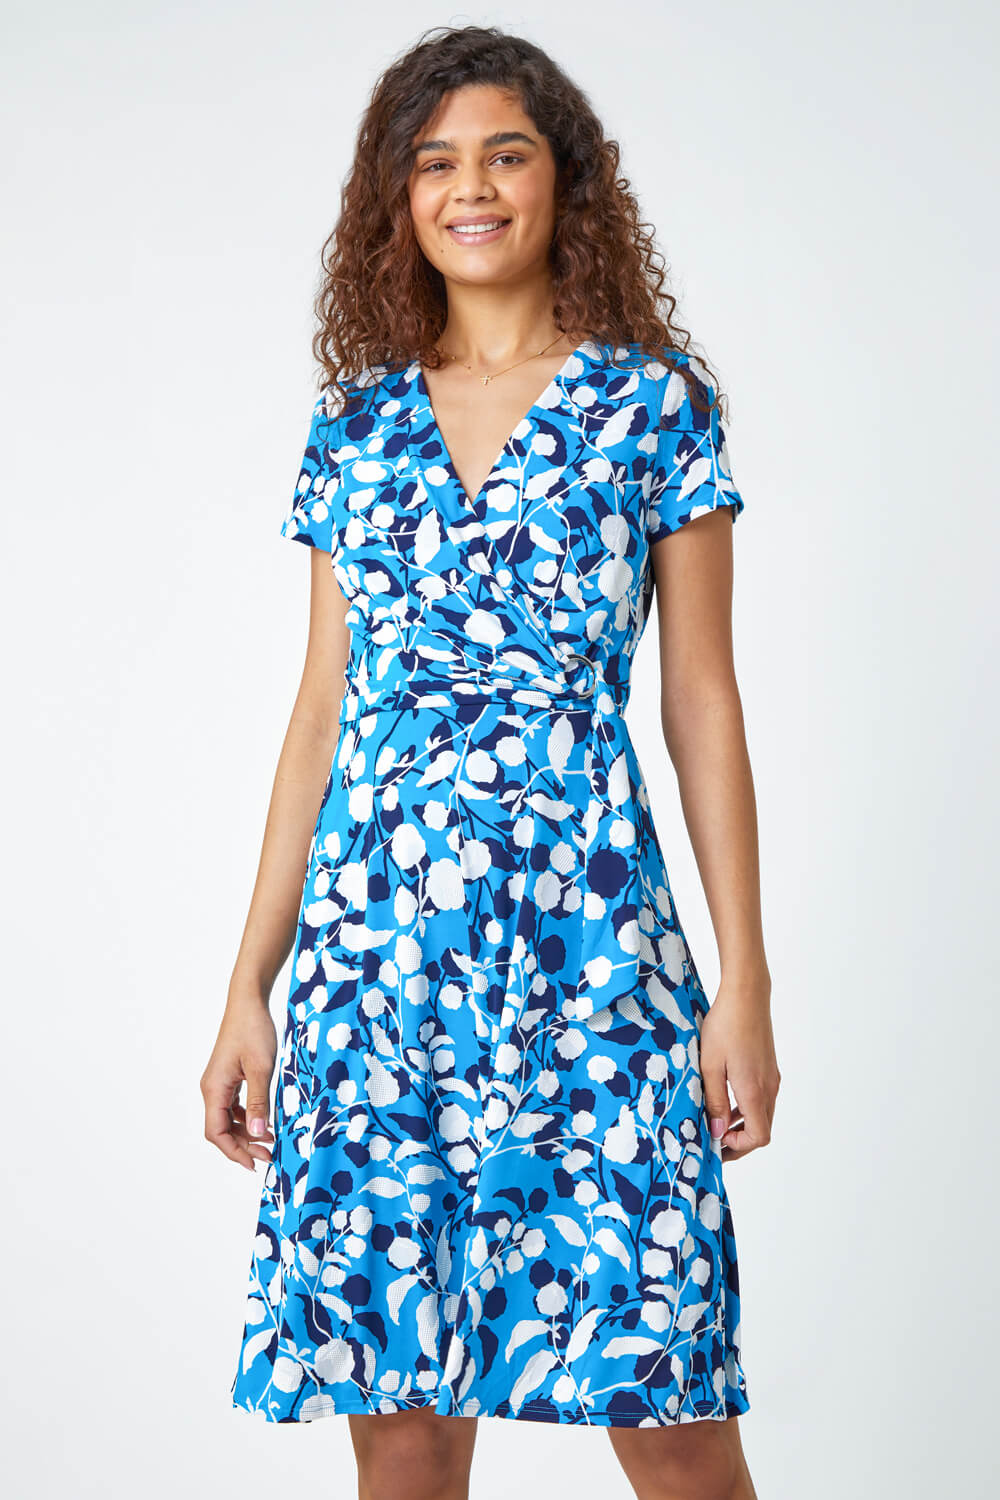 Turquoise Floral Stretch Wrap Skater Dress, Image 2 of 5